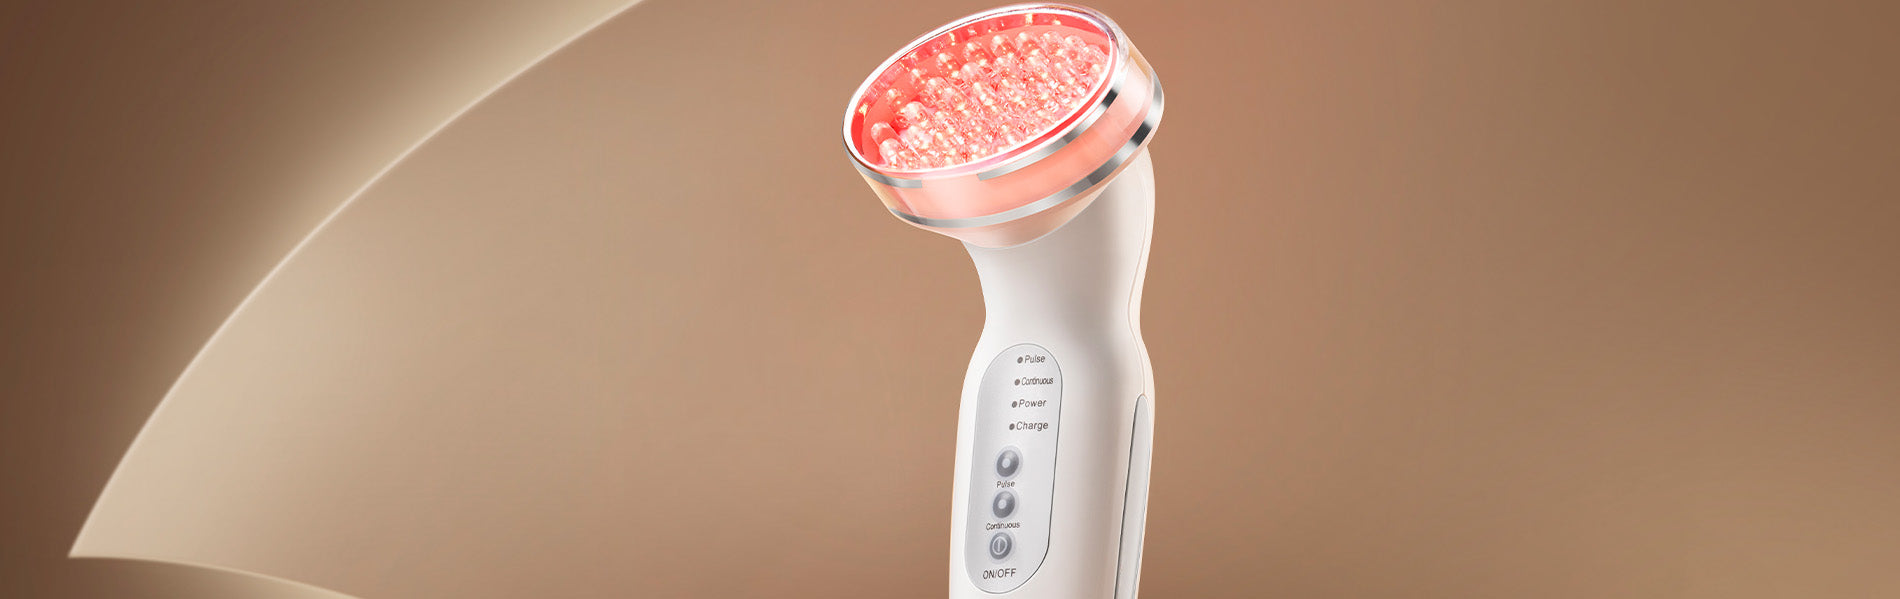 How Can LED Light Therapy Help with Skin Problems?